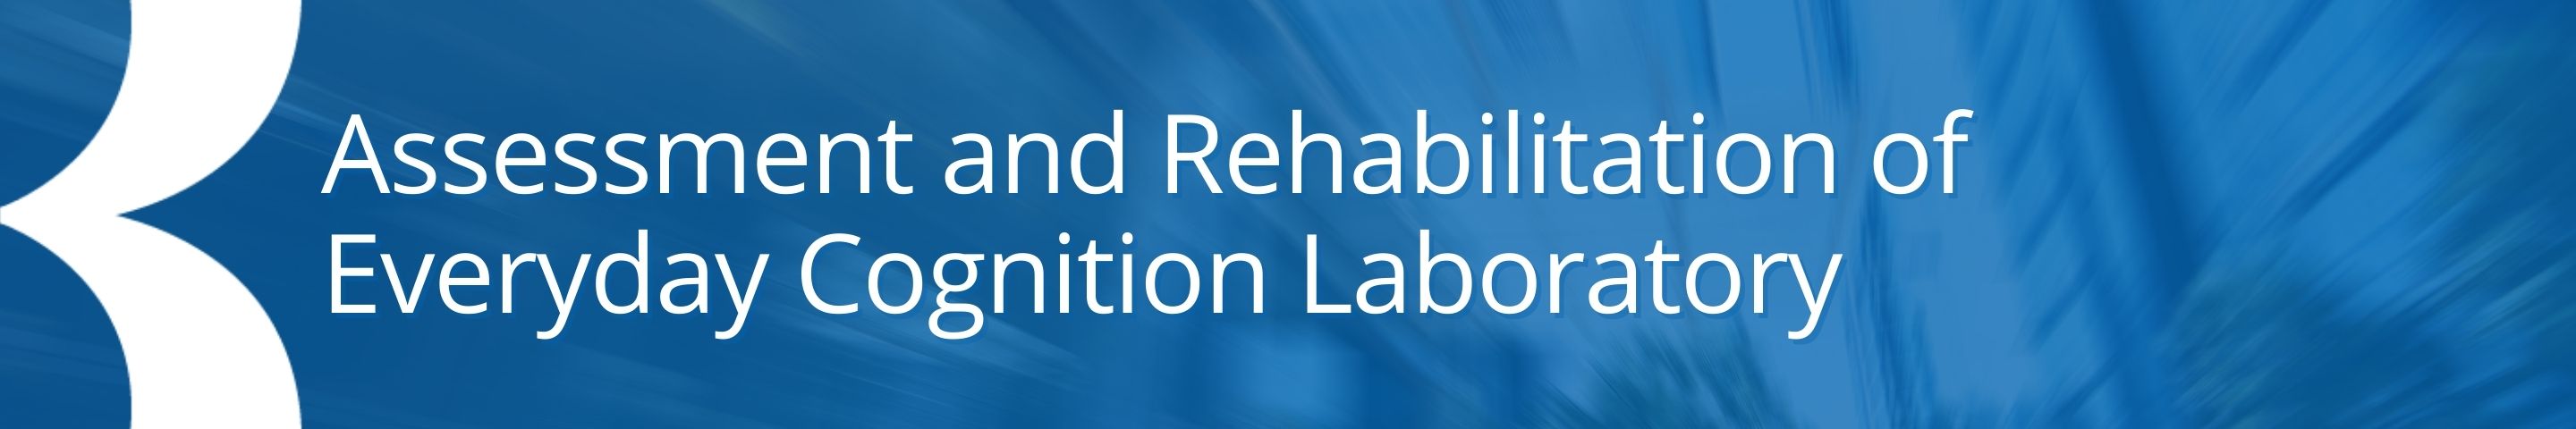 Assessment and Rehabilitation of Everyday Cognition Laboratory